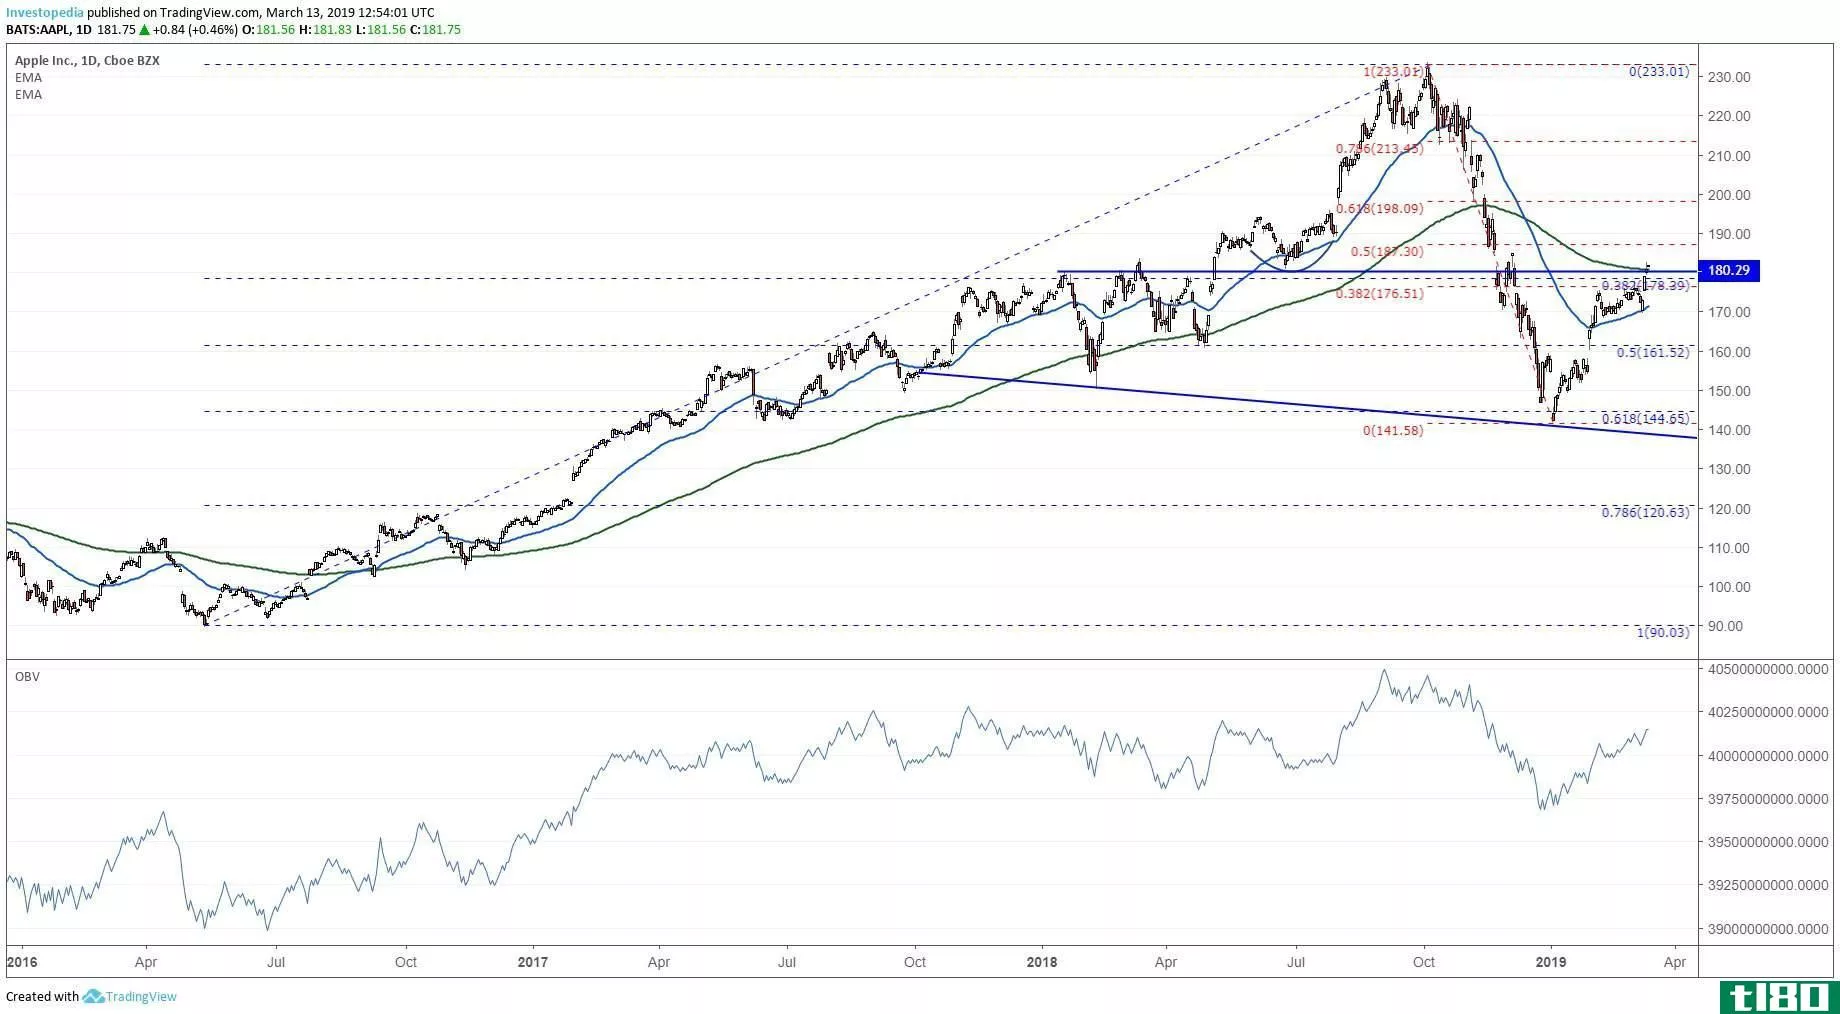 Short-term technical chart showing the share price performance of Apple Inc. (AAPL)